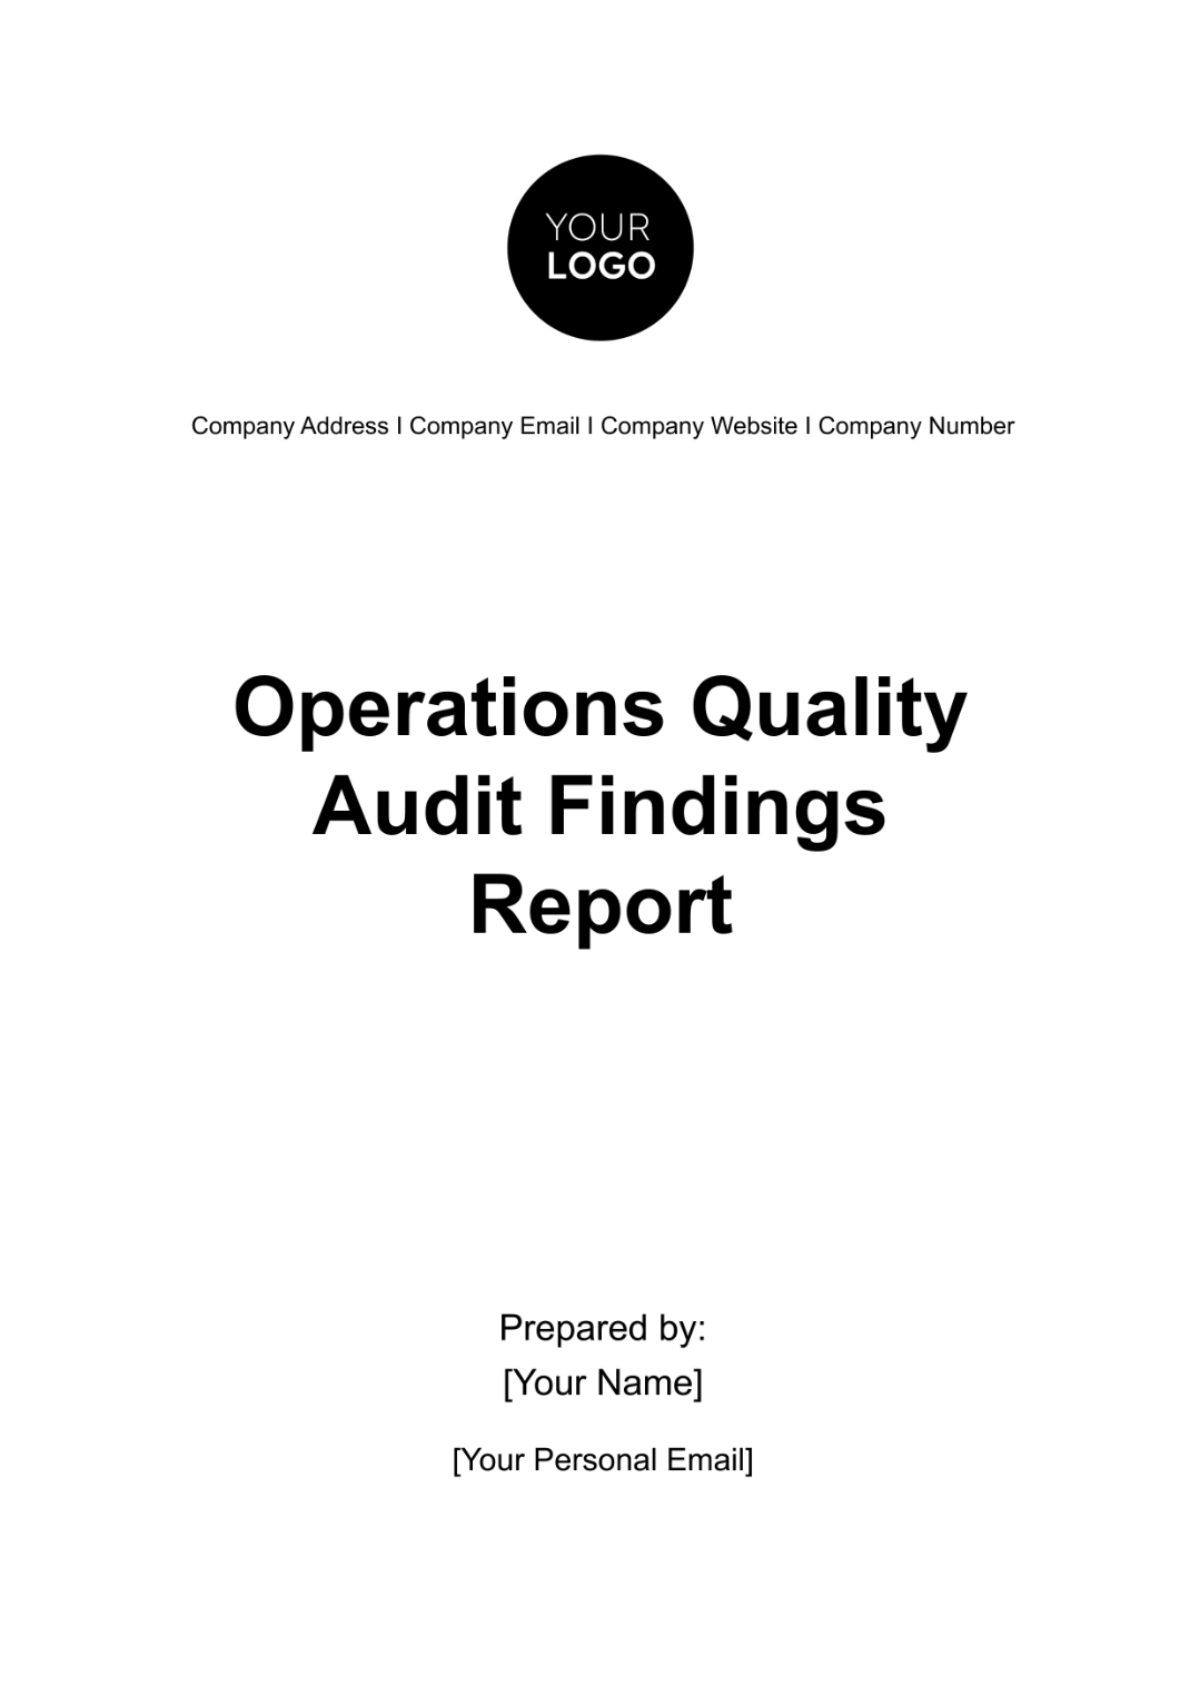 Operations Quality Audit Findings Report Template